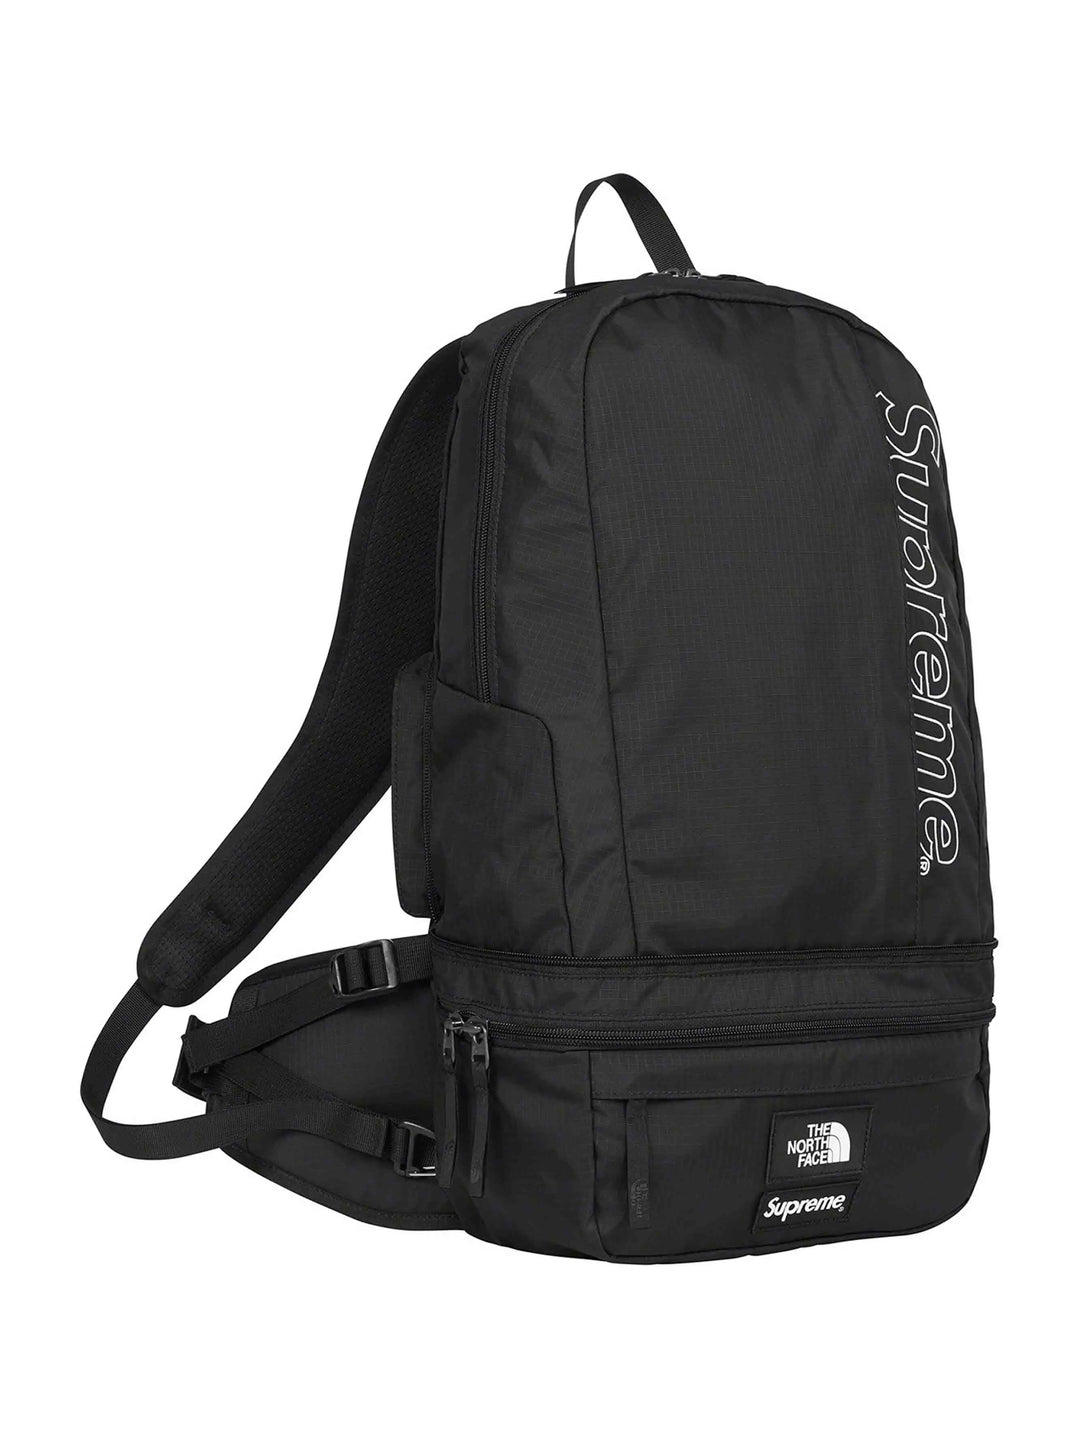 Supreme®/The North Face® Trekking Convertible Backpack + Waist Bag Prior